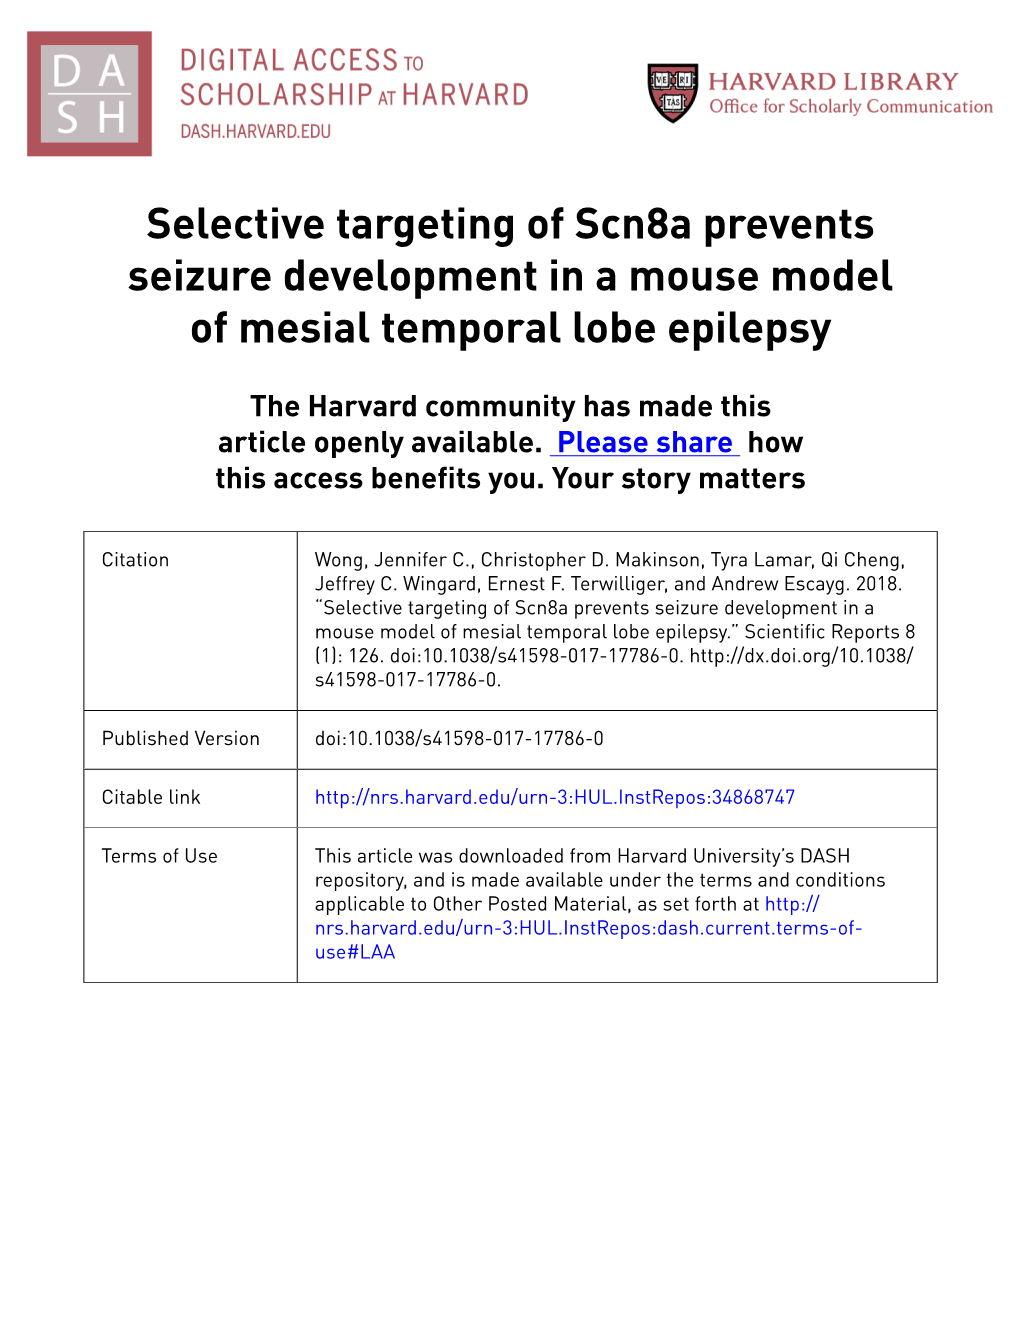 Selective Targeting of Scn8a Prevents Seizure Development in a Mouse Model of Mesial Temporal Lobe Epilepsy